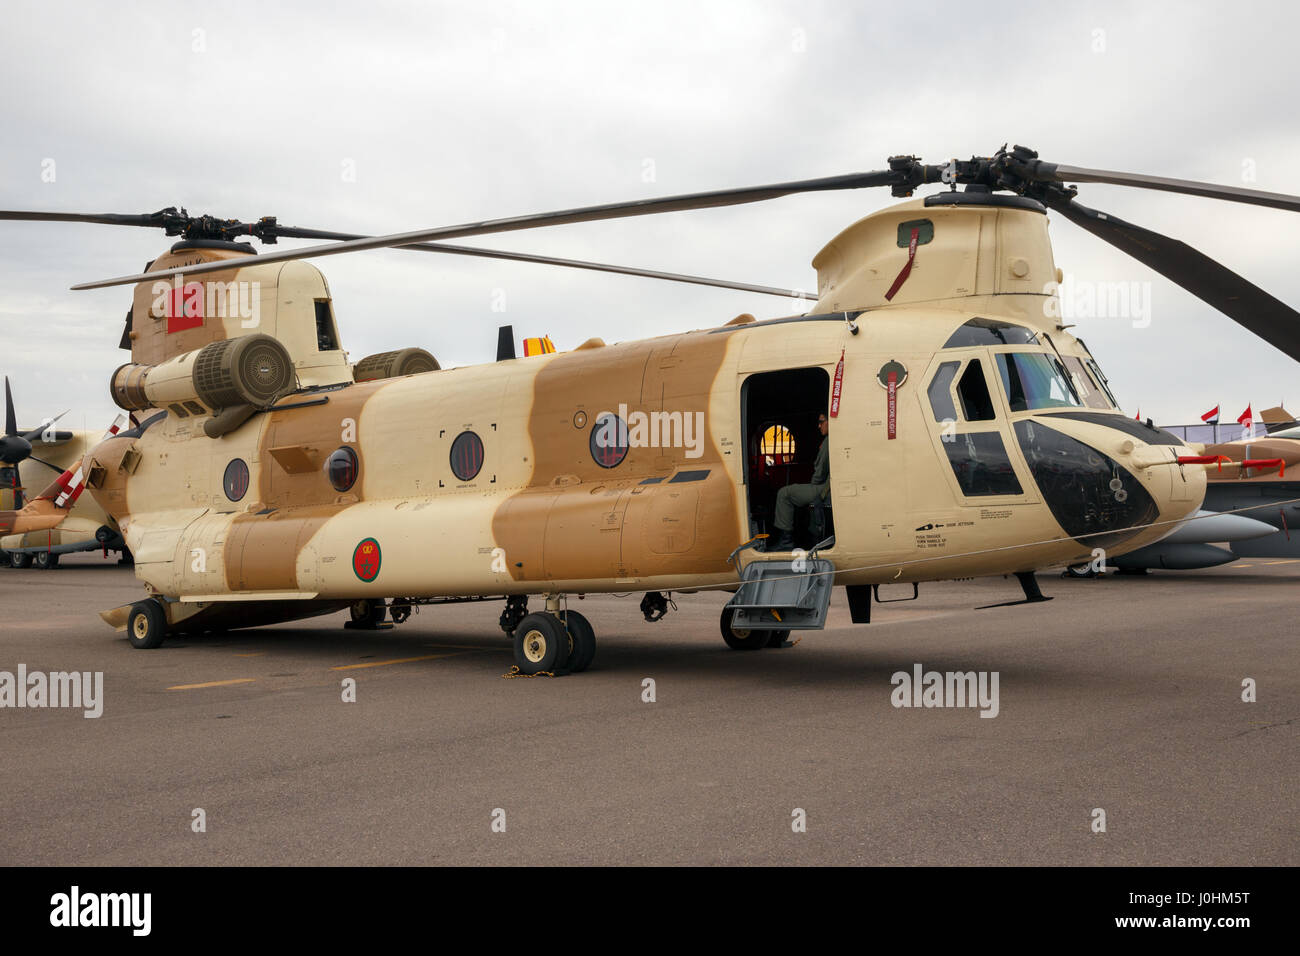 marrakech-morocco-apr-28-2016-new-ch-47d-chinook-helicopter-at-the-J0HM5T.jpg